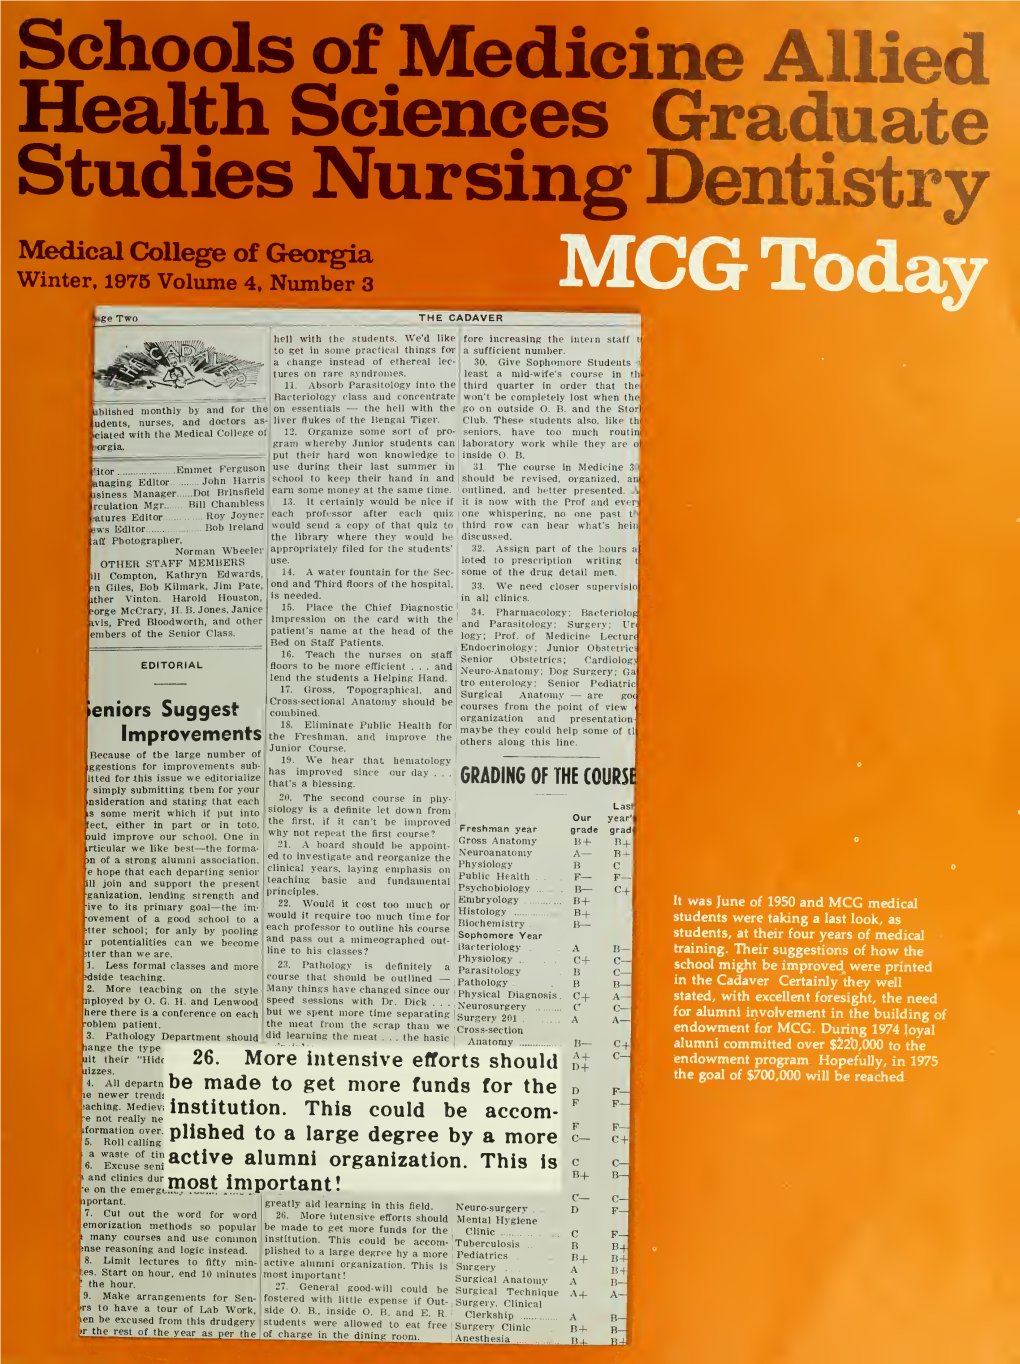 MCG Today Is Published Quarterly for Alumni and Friends by the Medical College of Georgia, Division of Institutional Rela- Tions